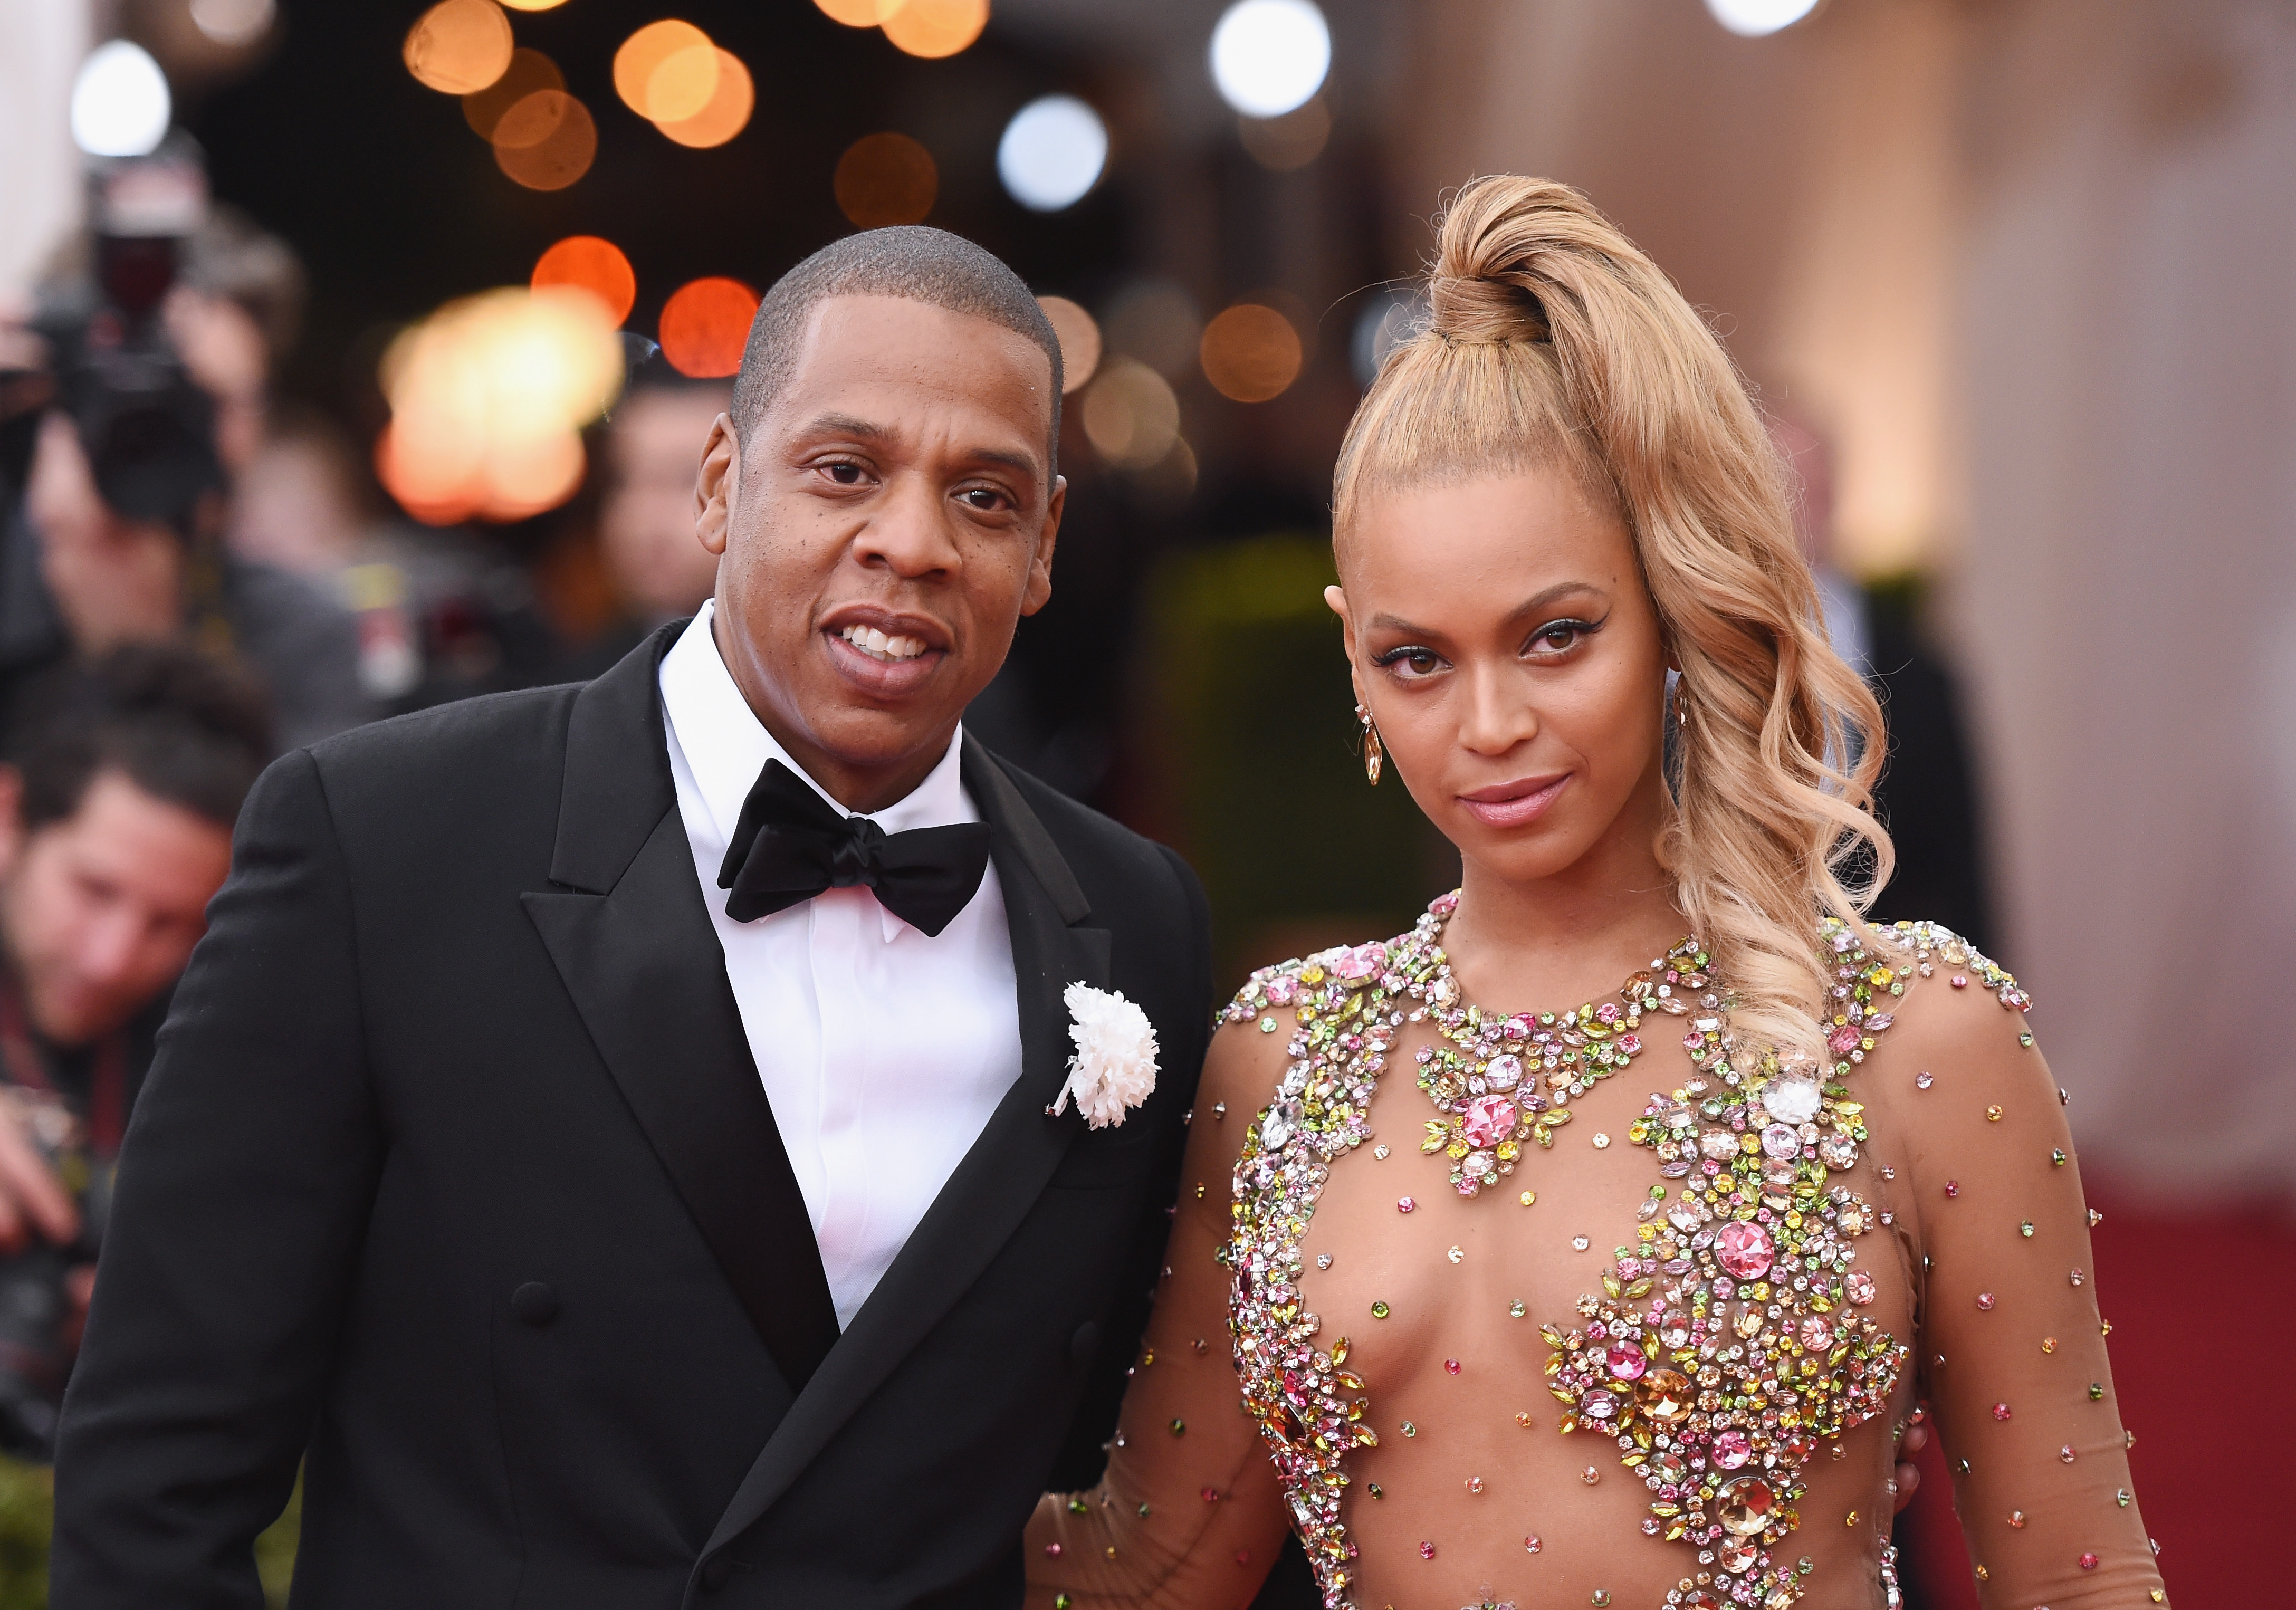 Beyoncé & Jay-Z’s “On The Run II” Tour Performance Will Change Due To Album Drop